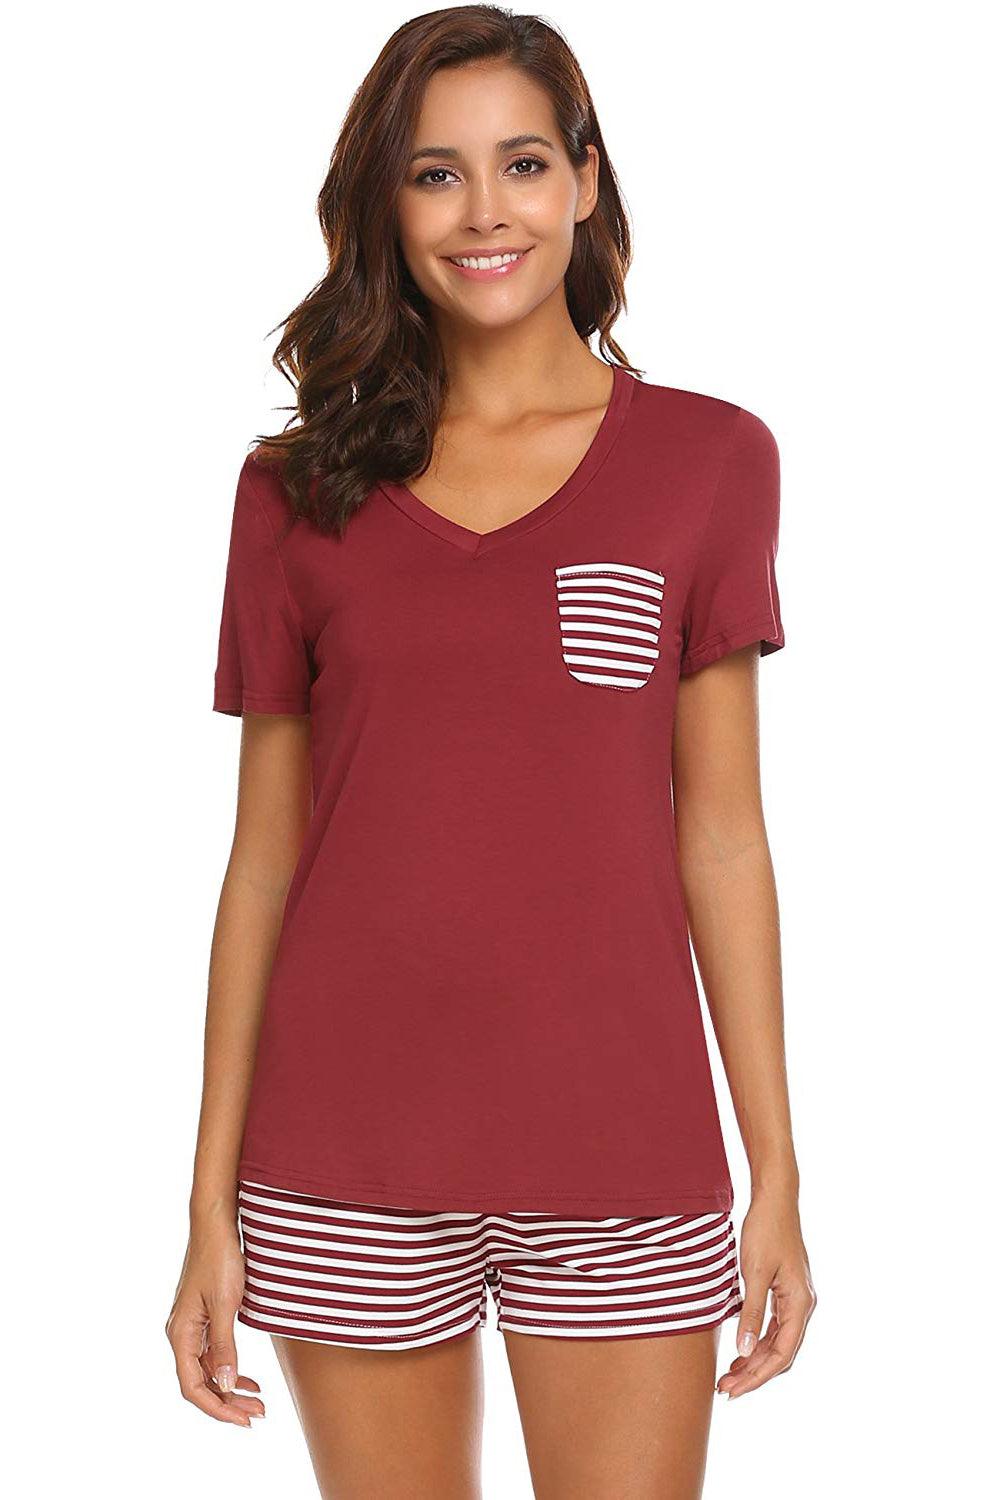 Striped Short Sleeve Top and Shorts Lounge Set - God's Girl Gifts And Apparel